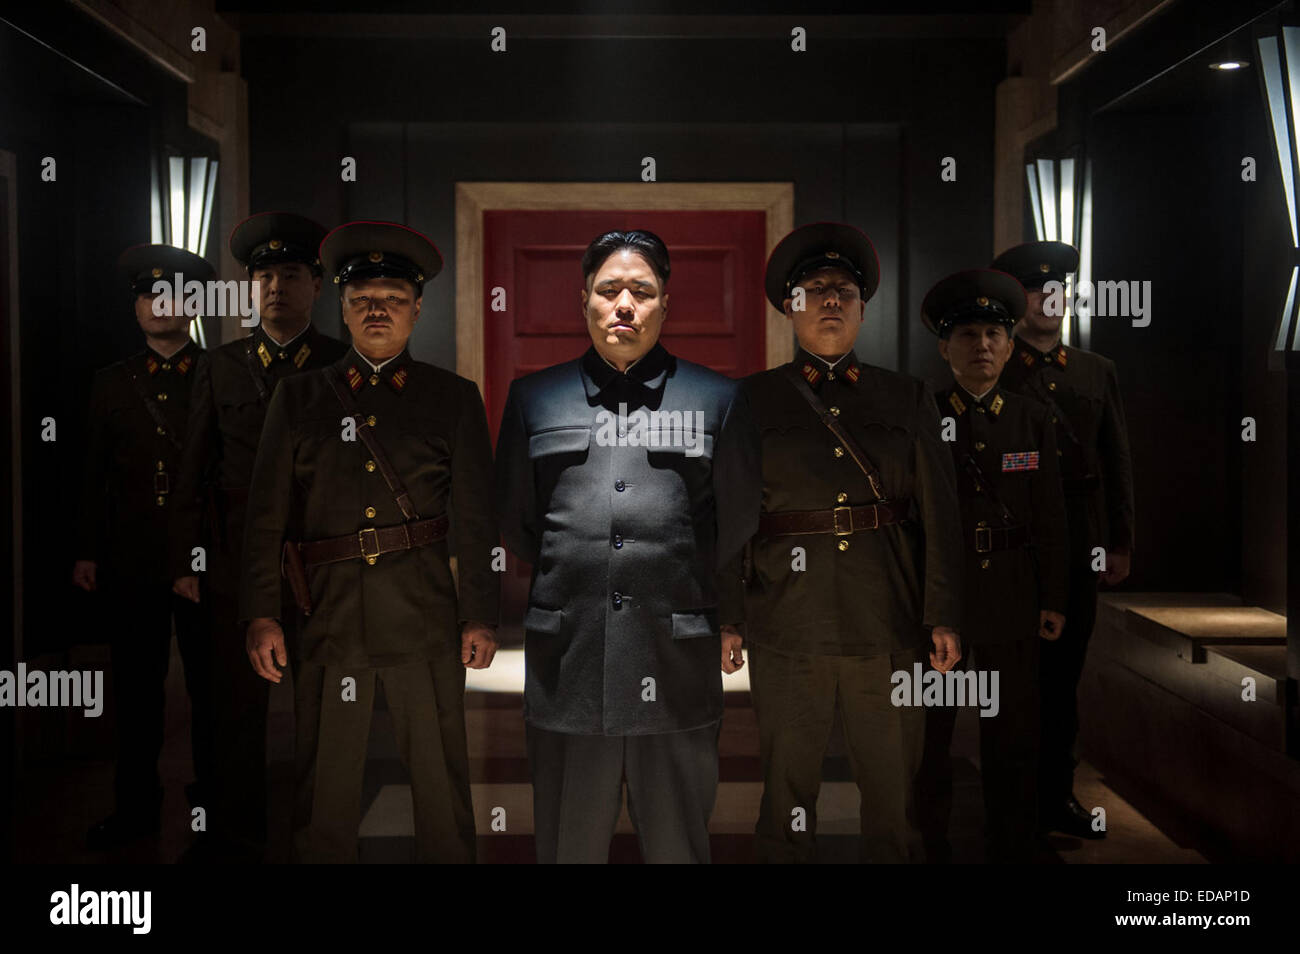 The Interview is a 2014 American political satire comedy film directed by Seth Rogen and Evan Goldberg in their second directorial work, following This Is the End. The screenplay by Dan Sterling is from a story by Rogen, Goldberg and Sterling. The film stars Rogen and James Franco as journalists instructed to assassinate North Korean leader Kim Jong-un (played by Randall Park) after booking an interview with him. Stock Photo